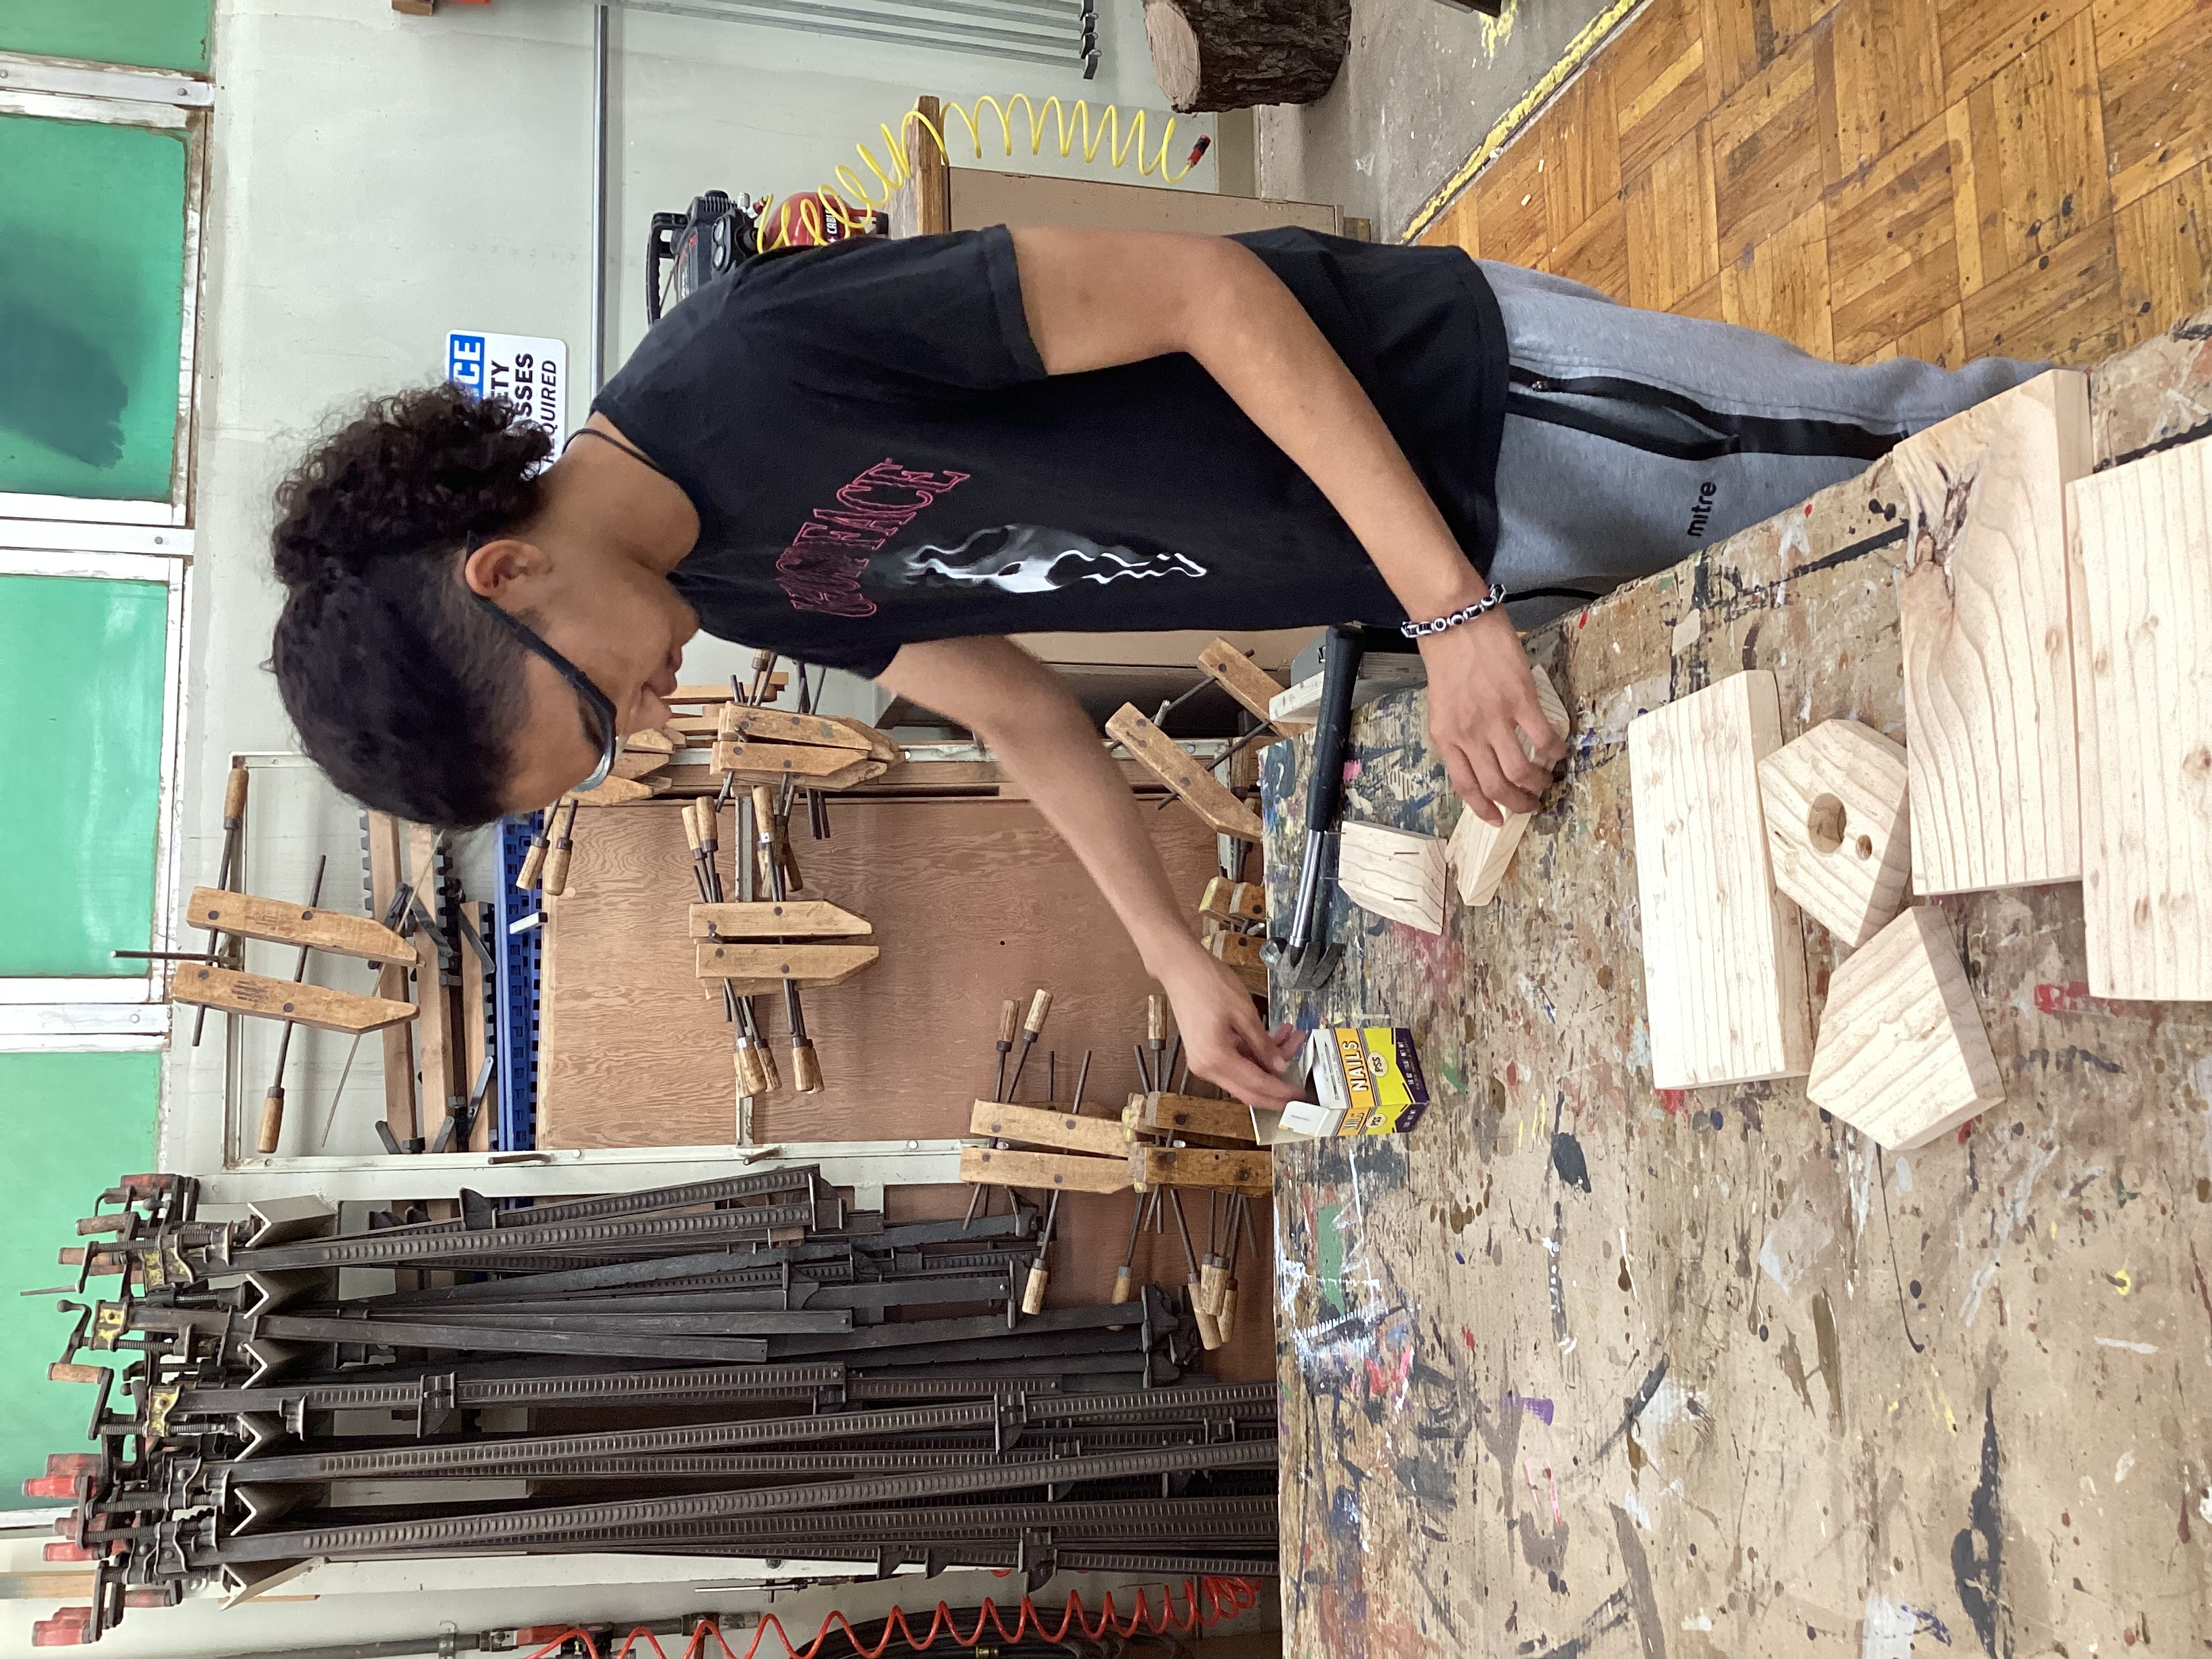 student working in shop